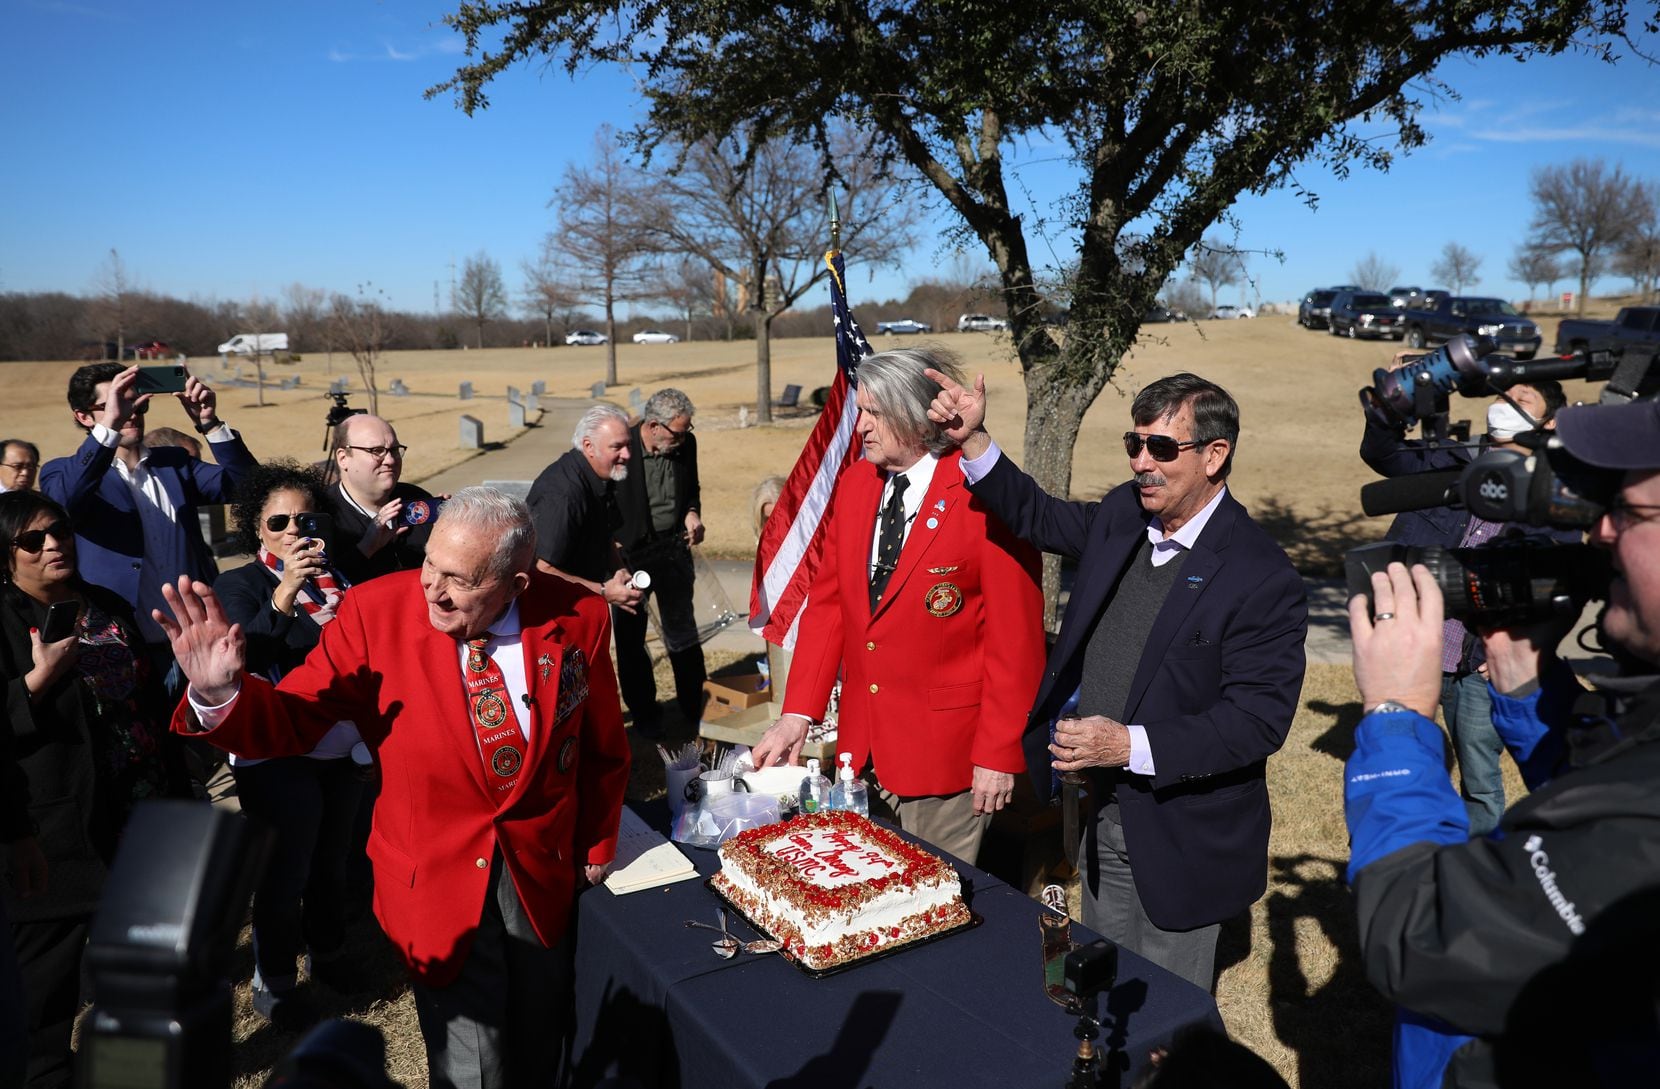 The crowd sings "Happy Birthday" to retired Lt. Gen. Richard Carey (left) at an impromptu birthday 94th birthday celebration after the groundbreaking for the Chosin Few Memorial at Dallas-Fort Worth National Cemetery.